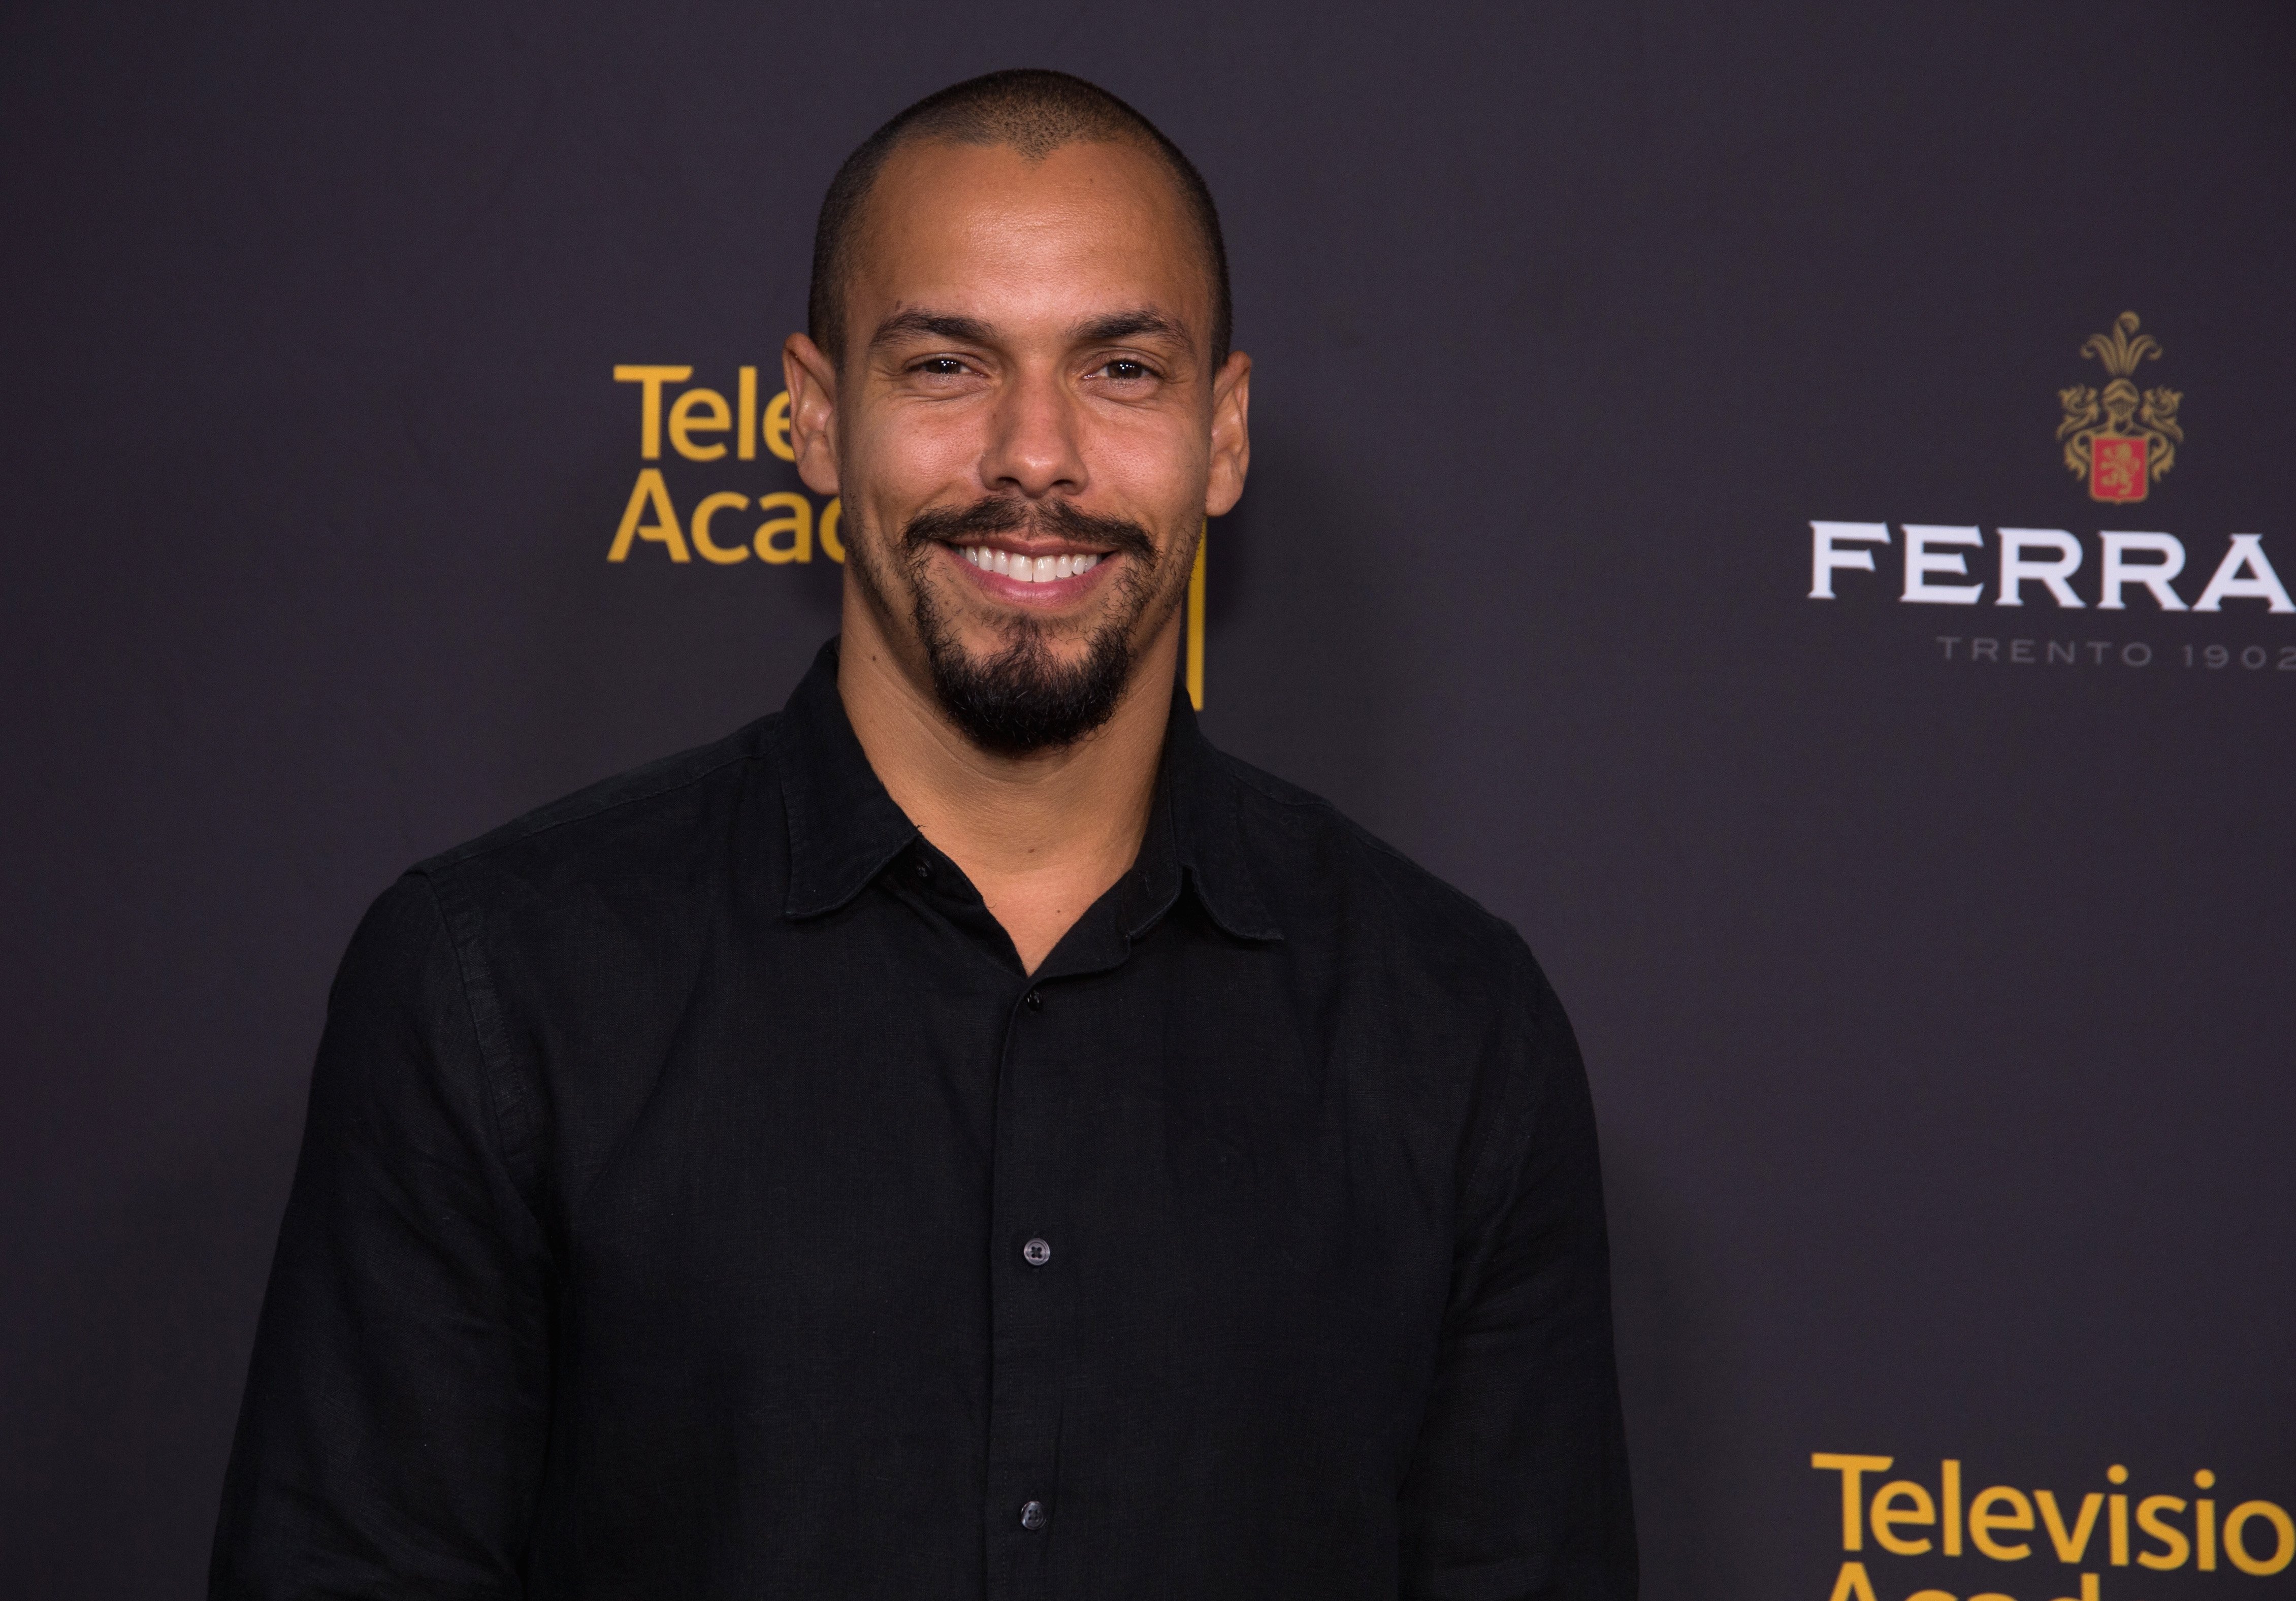 'The Young and the Restless' actor Bryton James wearing a black shirt during a red carpet appearance.